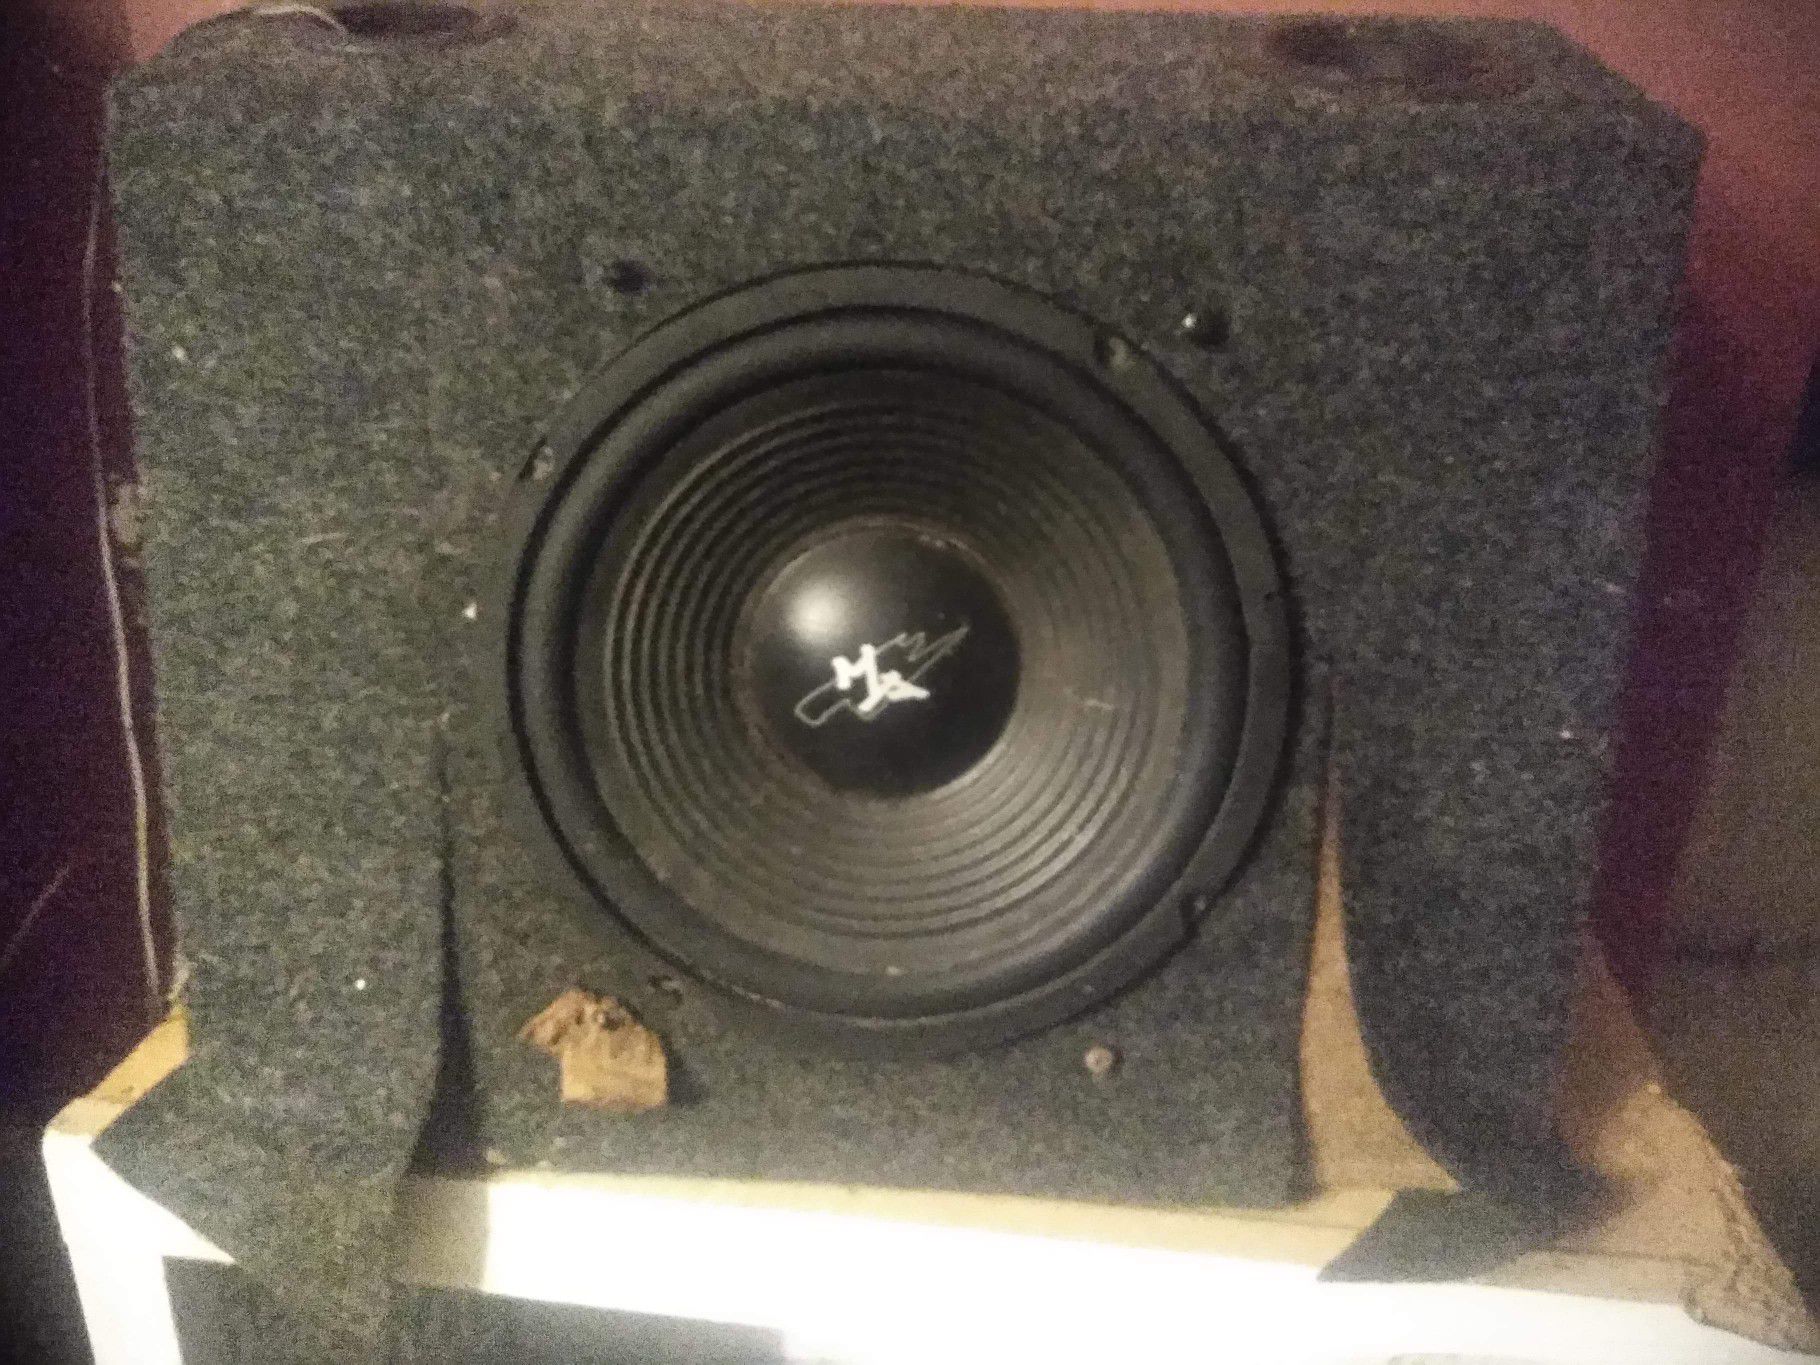 10in MTX 500 watt RMS subwoofer in under the seat box excellent condition works great Asking $25 or best offer